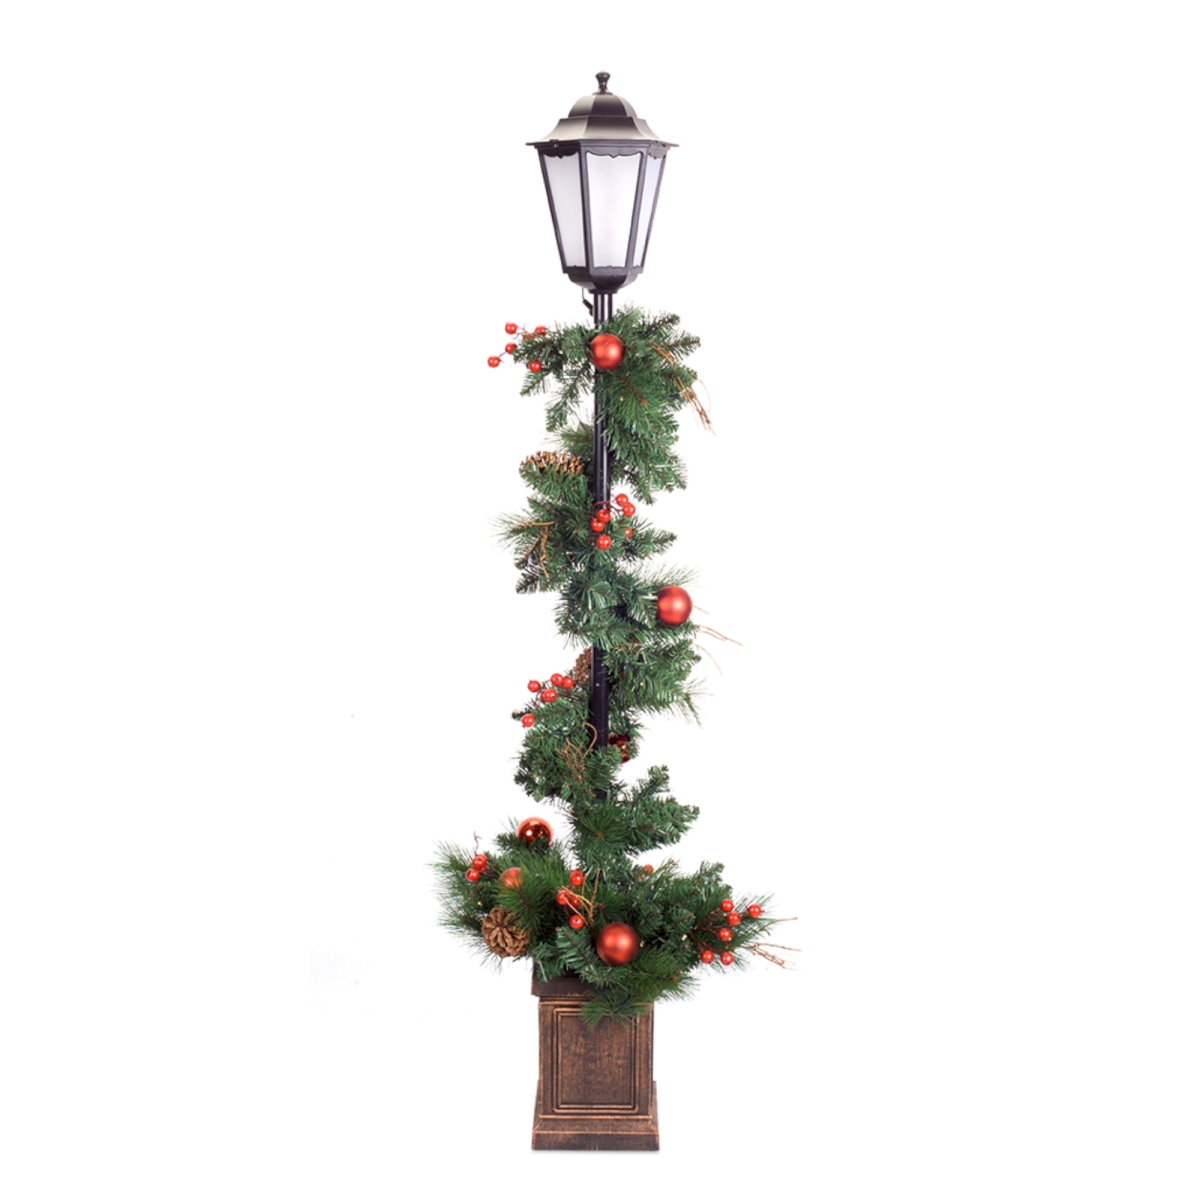 72807ds 5 Ft. Lantern With Pine Potted Pvc & Metal - Green & Red